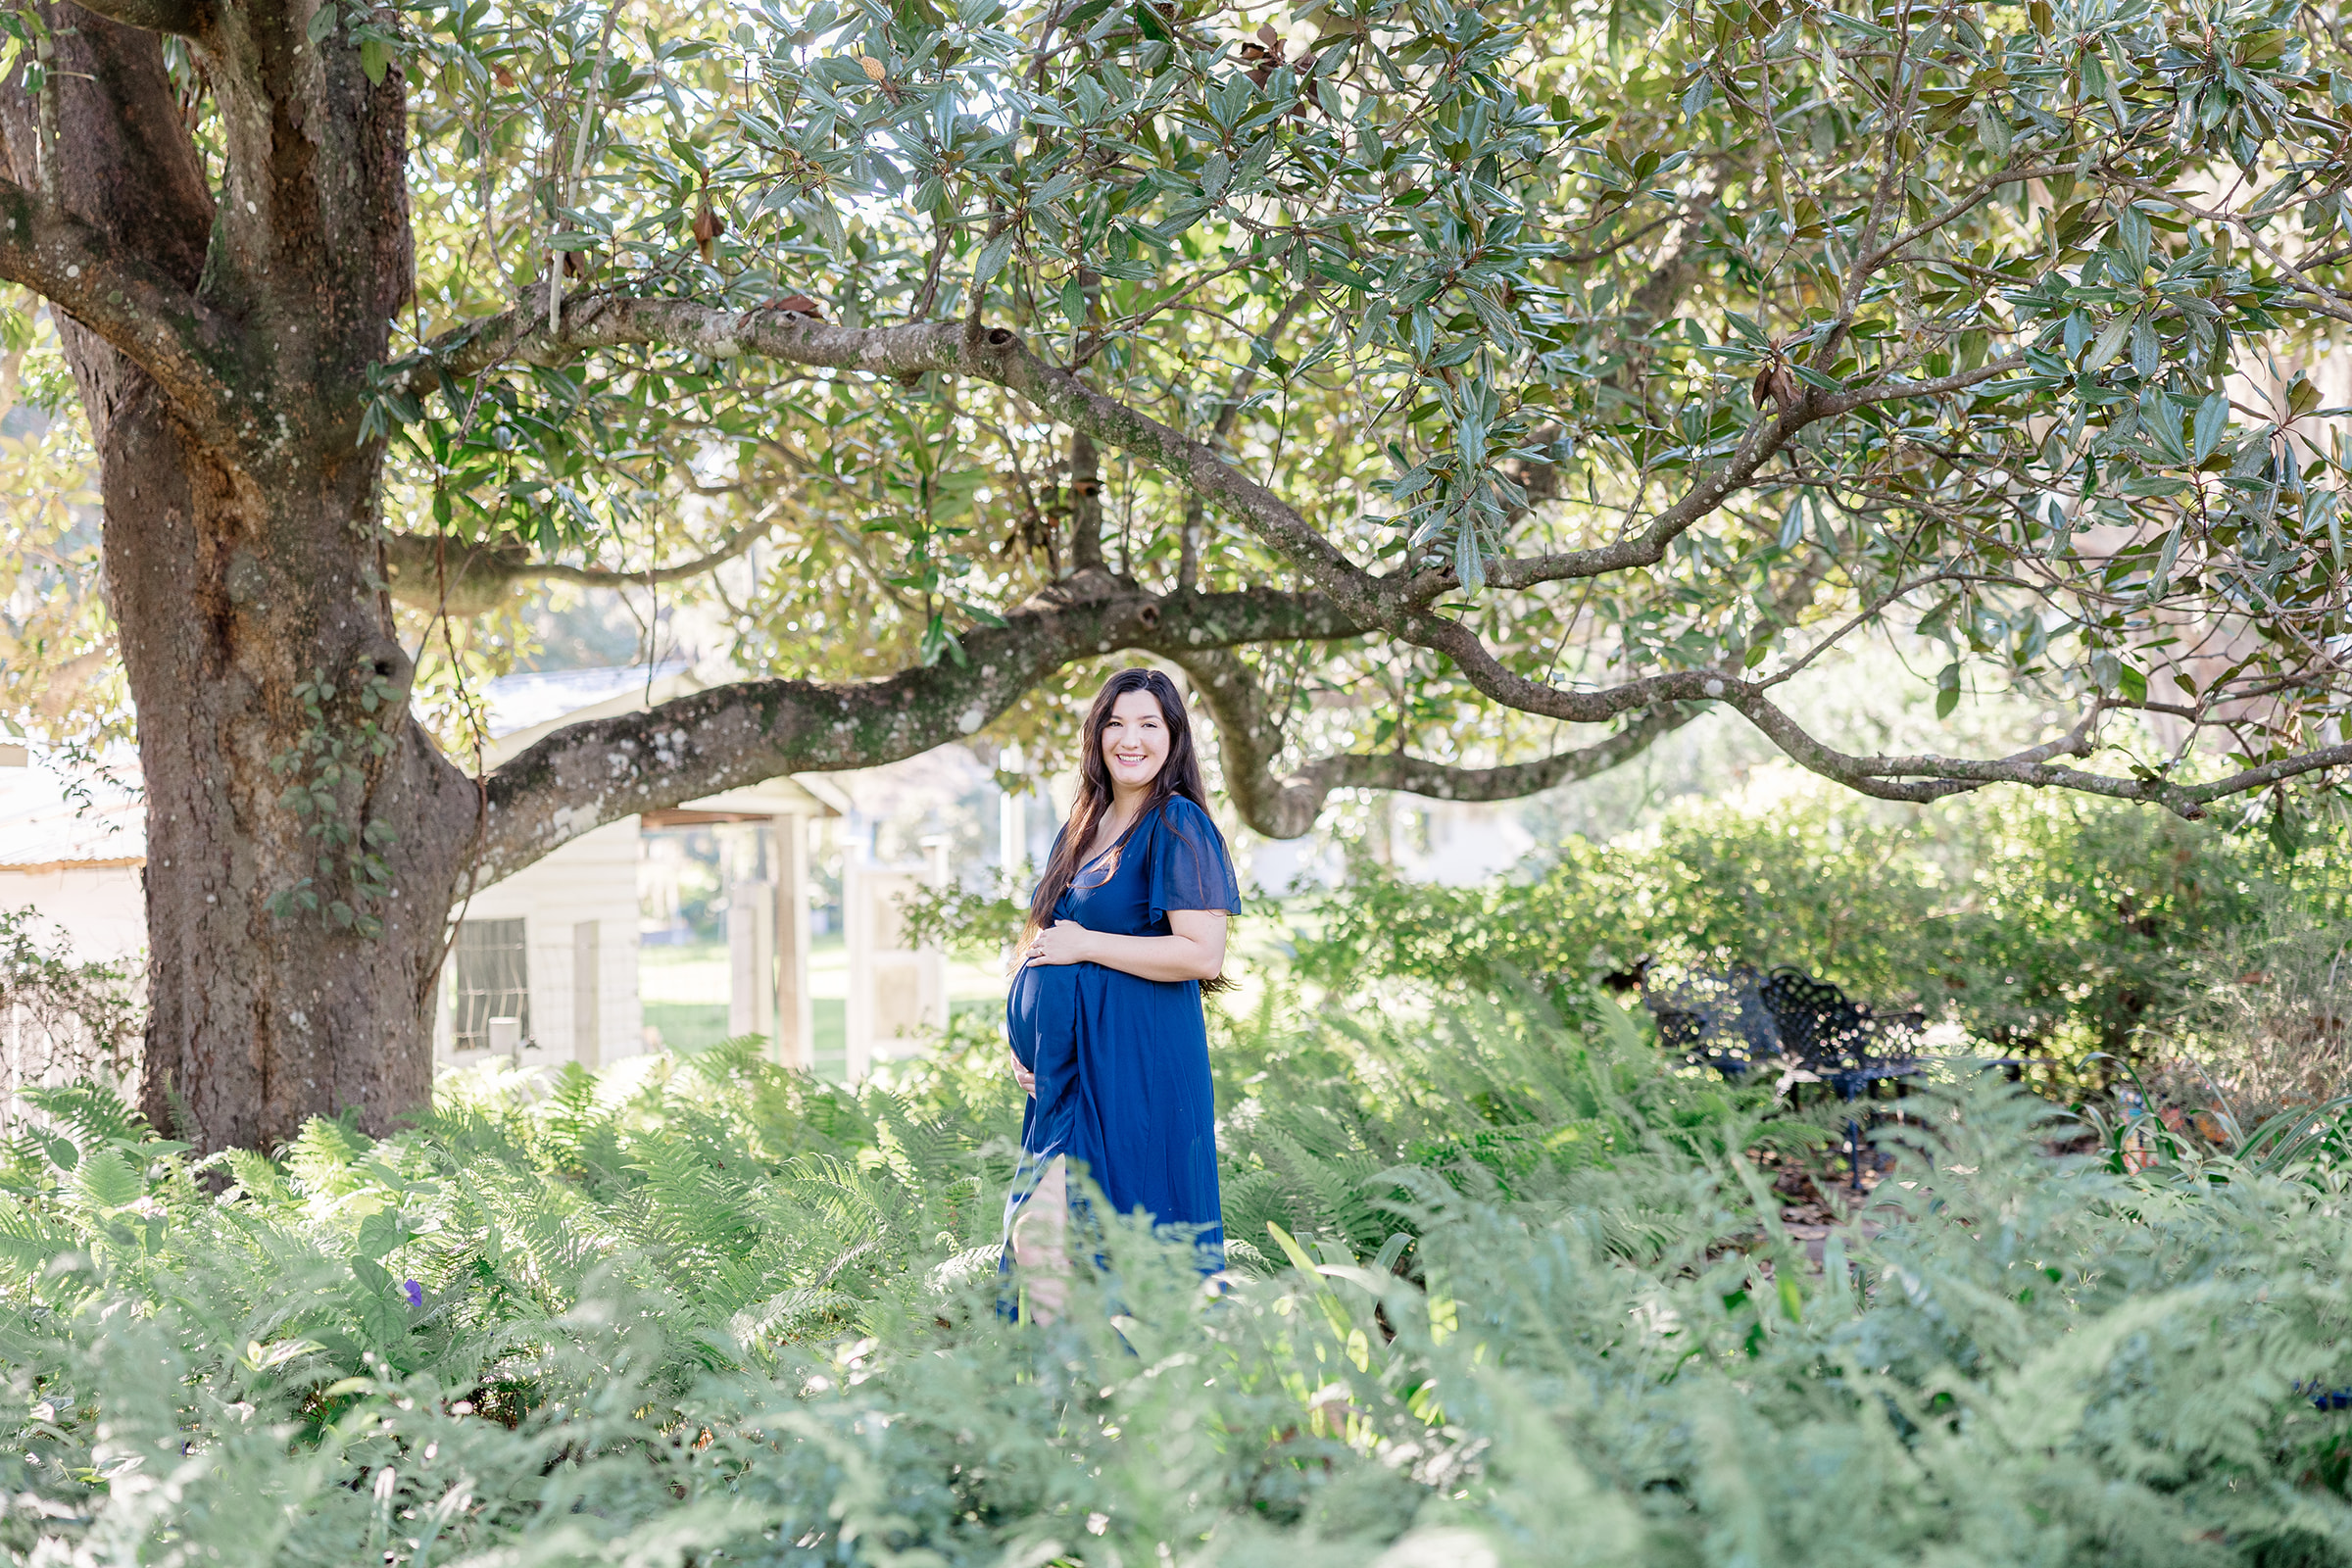 Expectant Mom in navy blue dress under the arch of a large tree